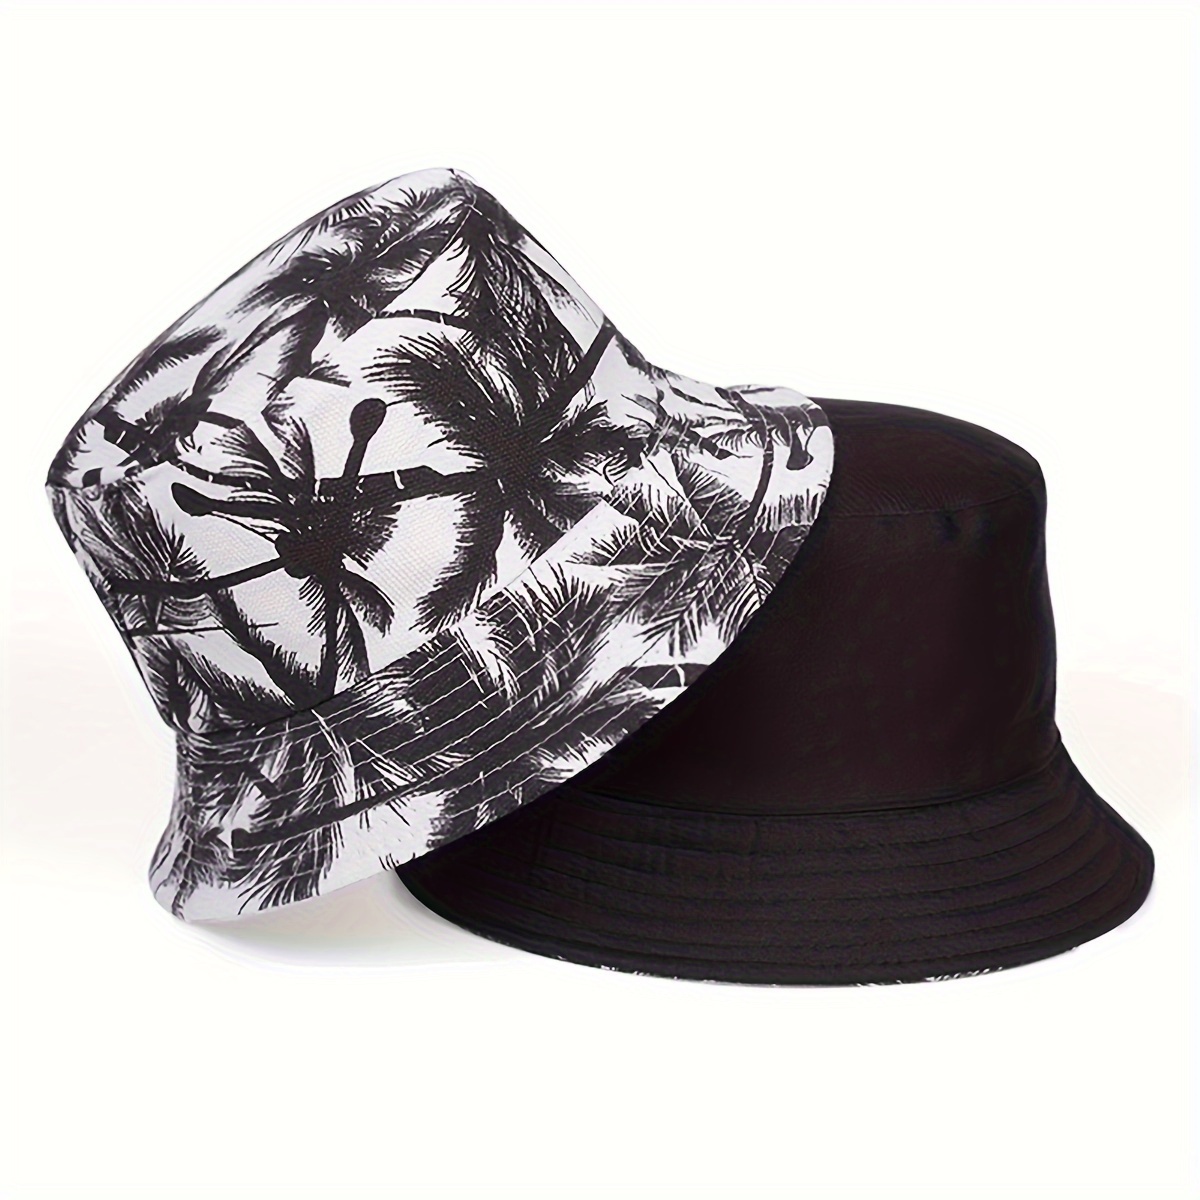 

1pc Men's Leaf Printed Bucket Hat, Outdoor Sunscreen Casual Hat, Suitable For Spring And Autumn Travel